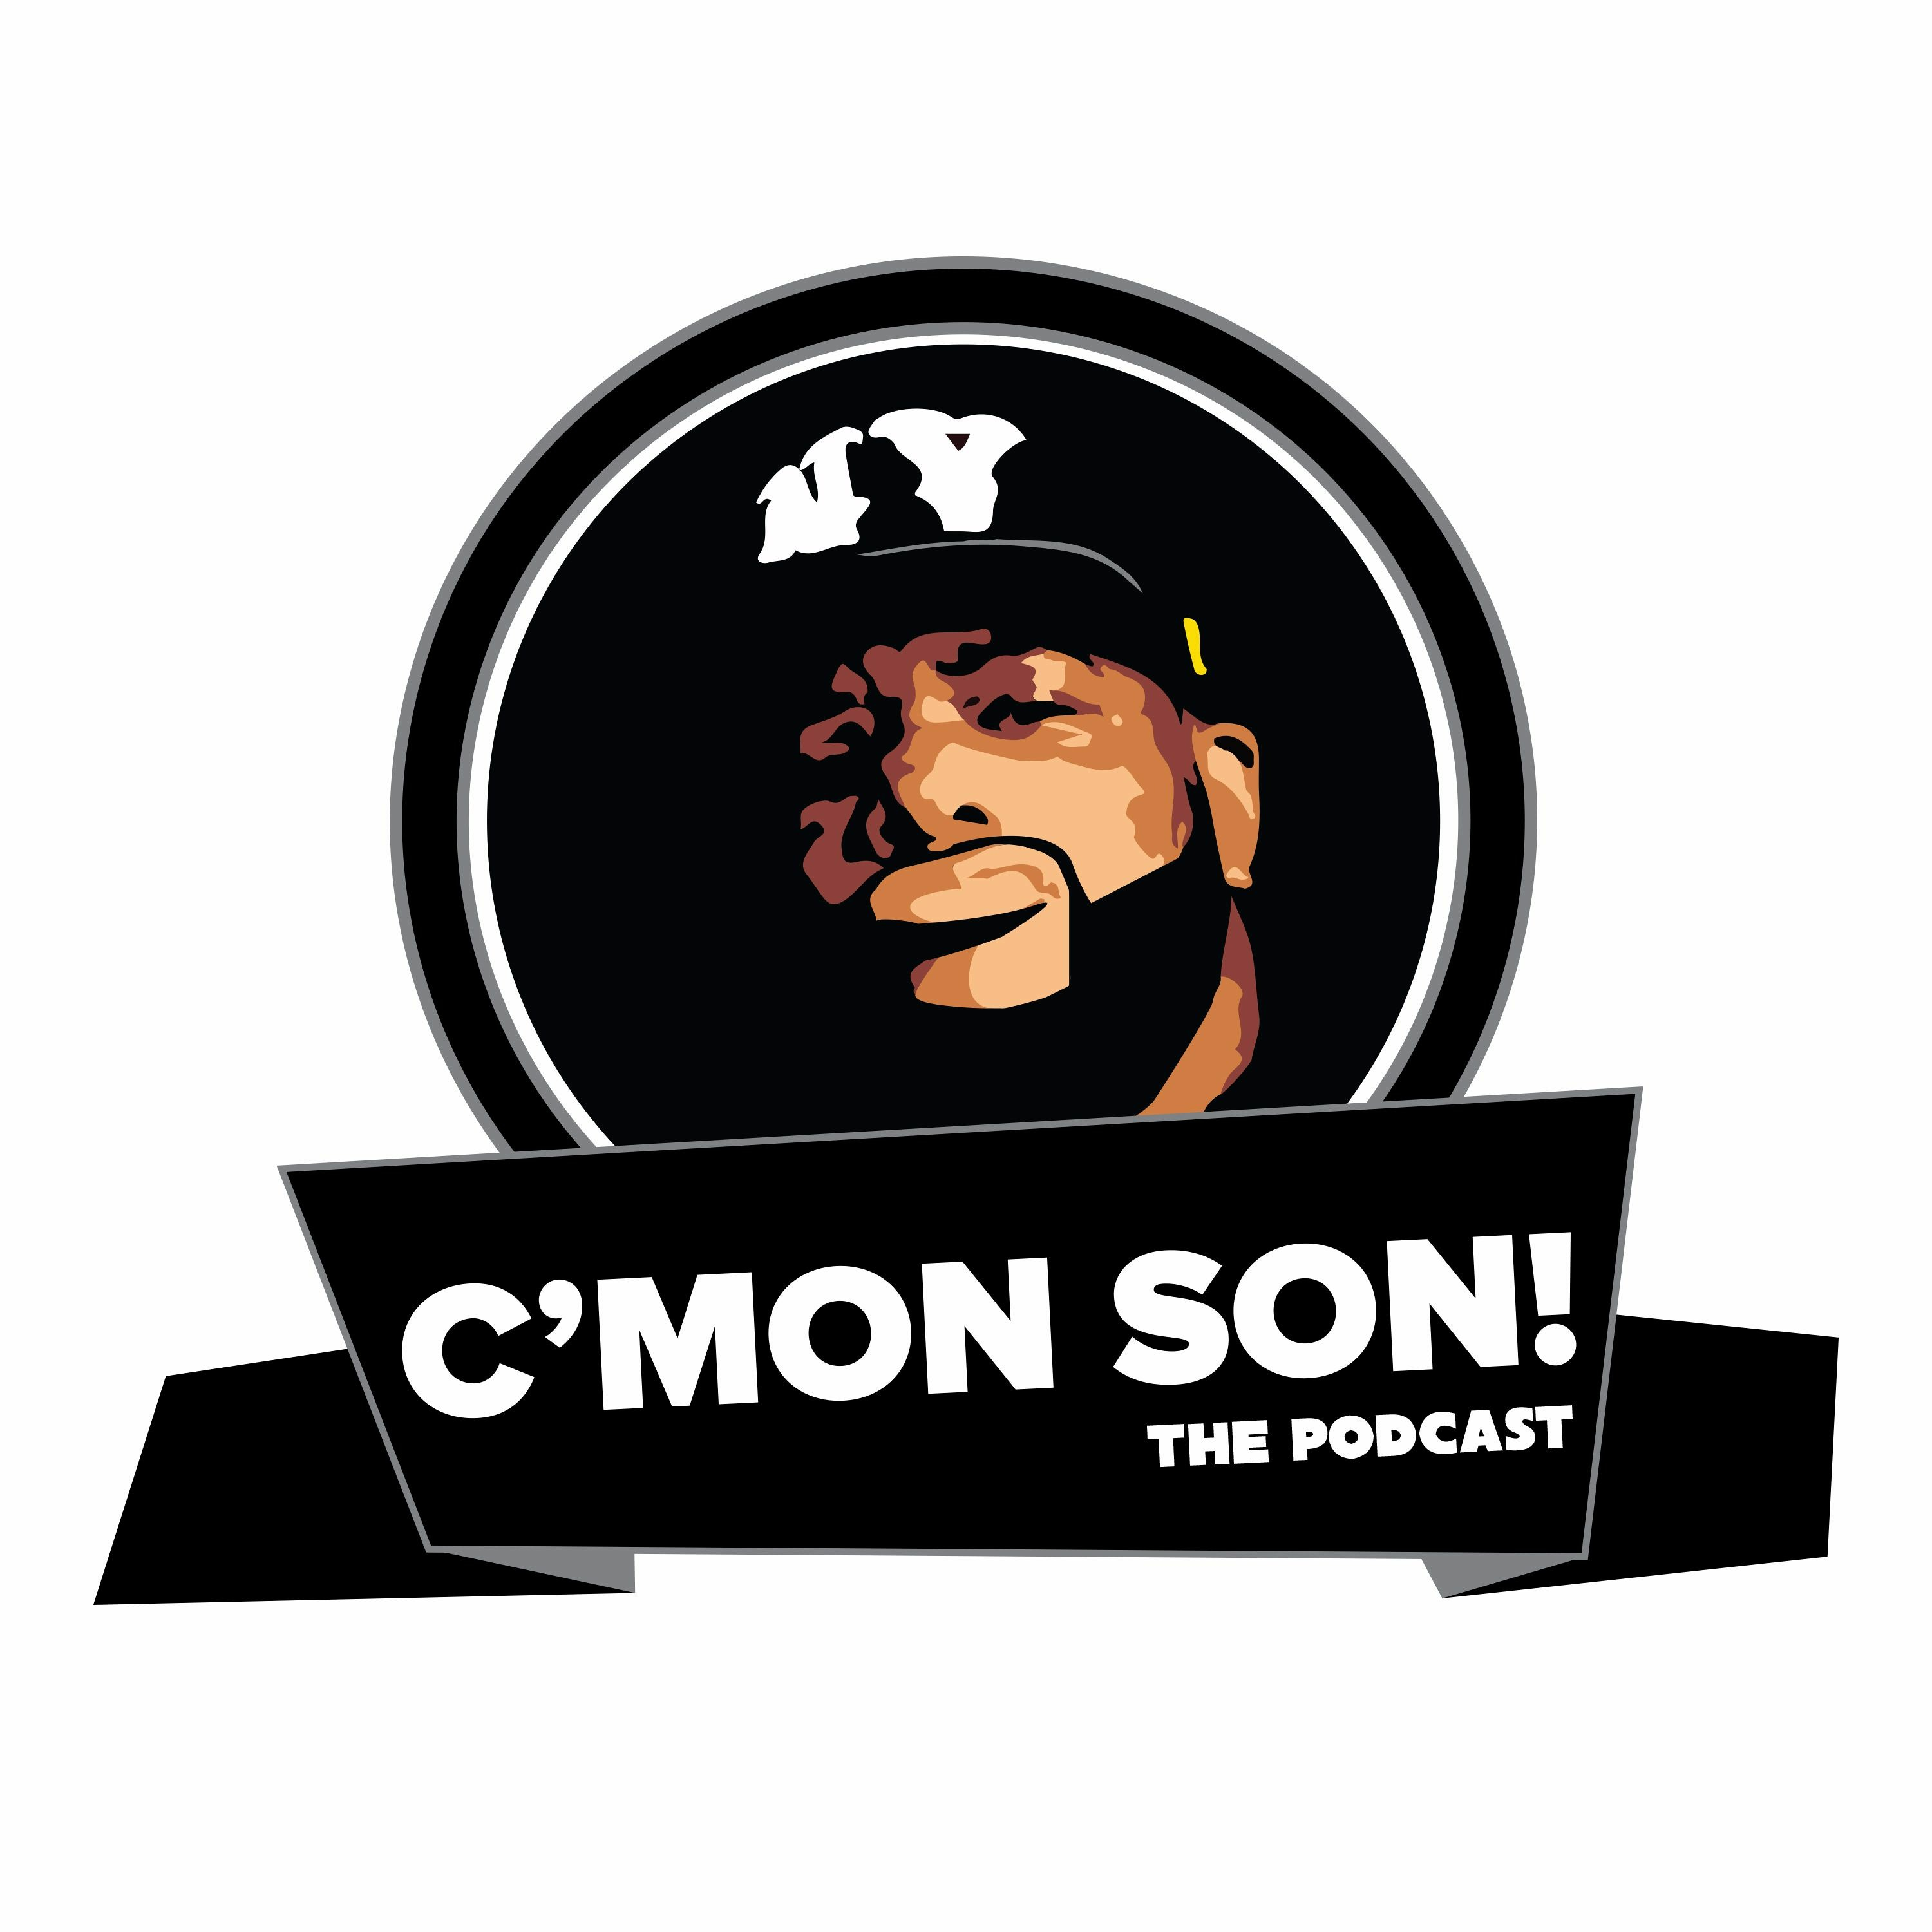 C'Mon Son! The Podcast Series #5 Episode #52: No Need To Be Bitter, Don't Let Them Steal Your Shine!